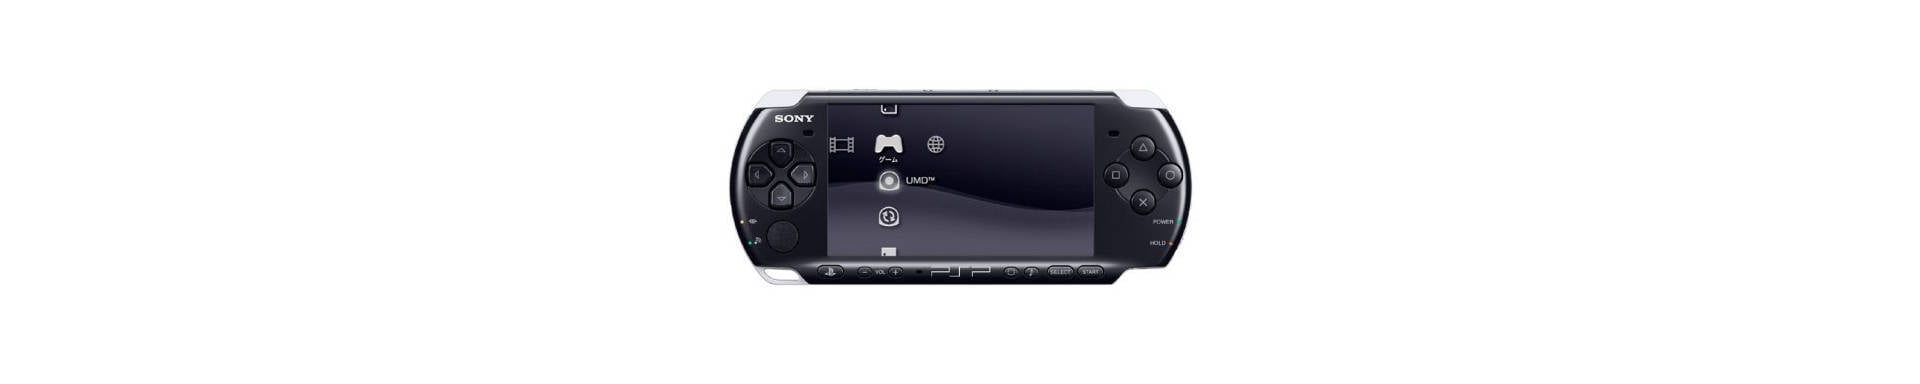 PlayStation Store PS3 Vita staying online slice